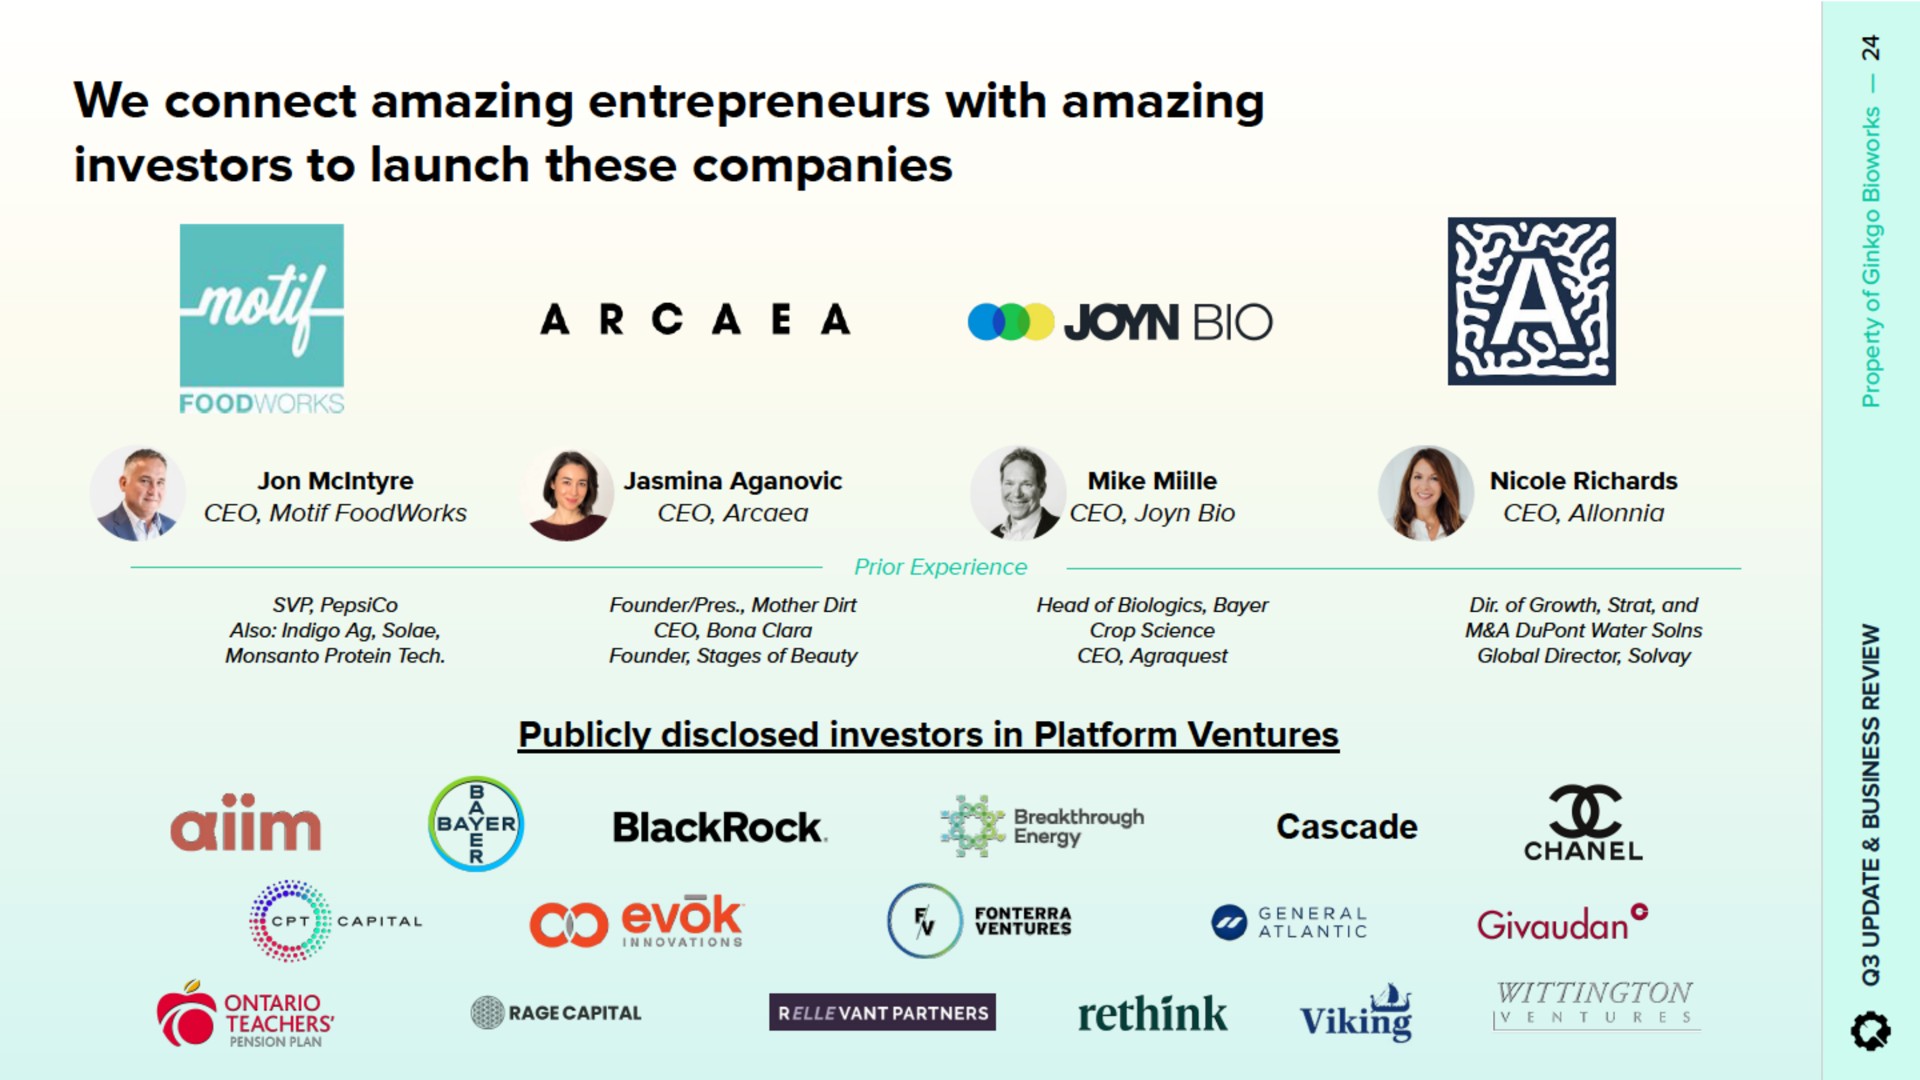 we connect amazing entrepreneurs with amazing investors to launch these companies rethink viking | Ginkgo